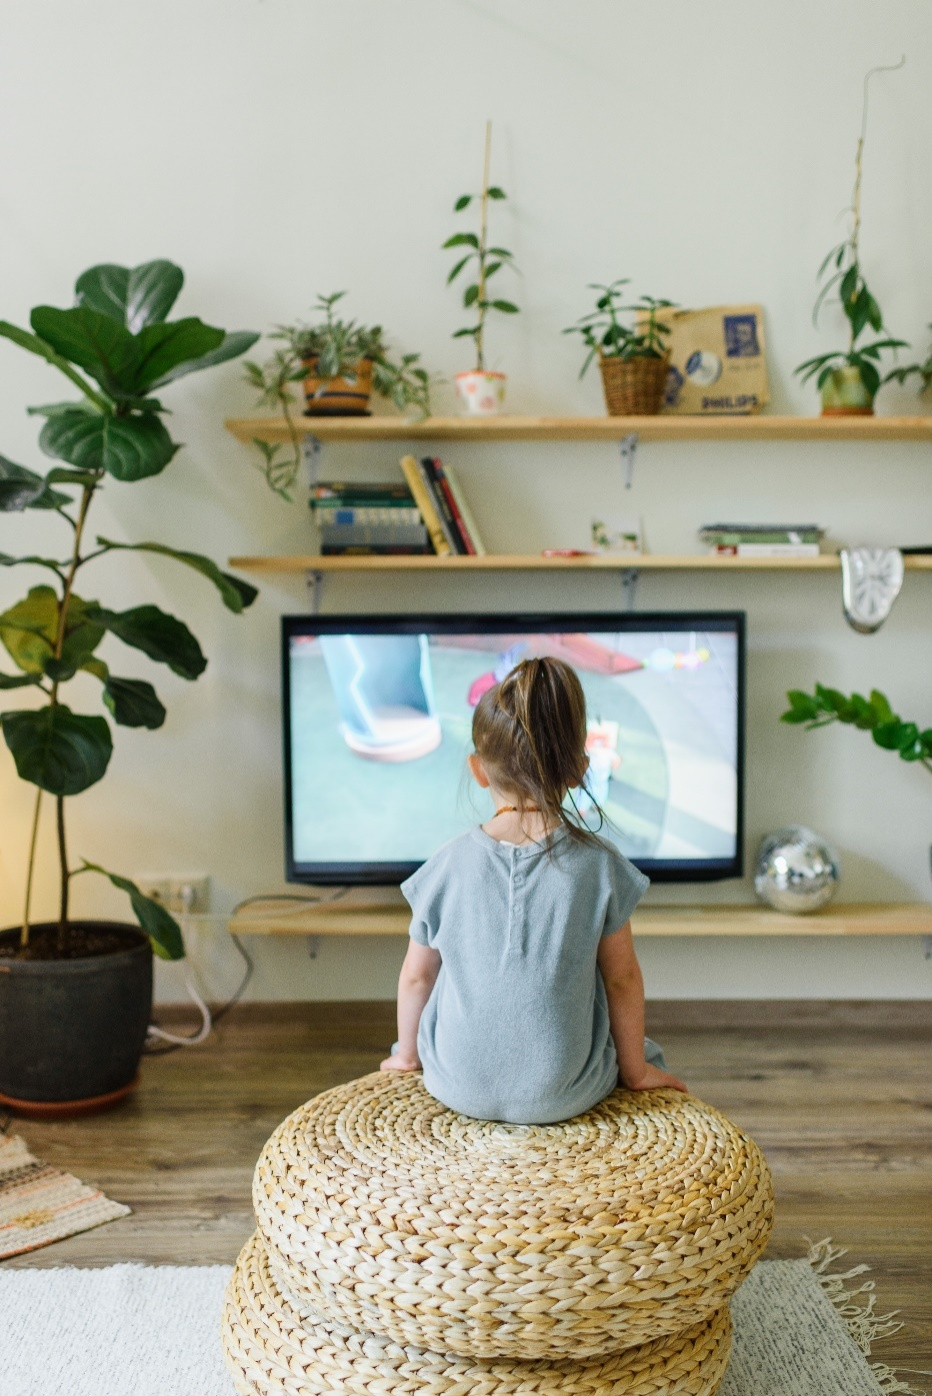 A-child-watching-TV